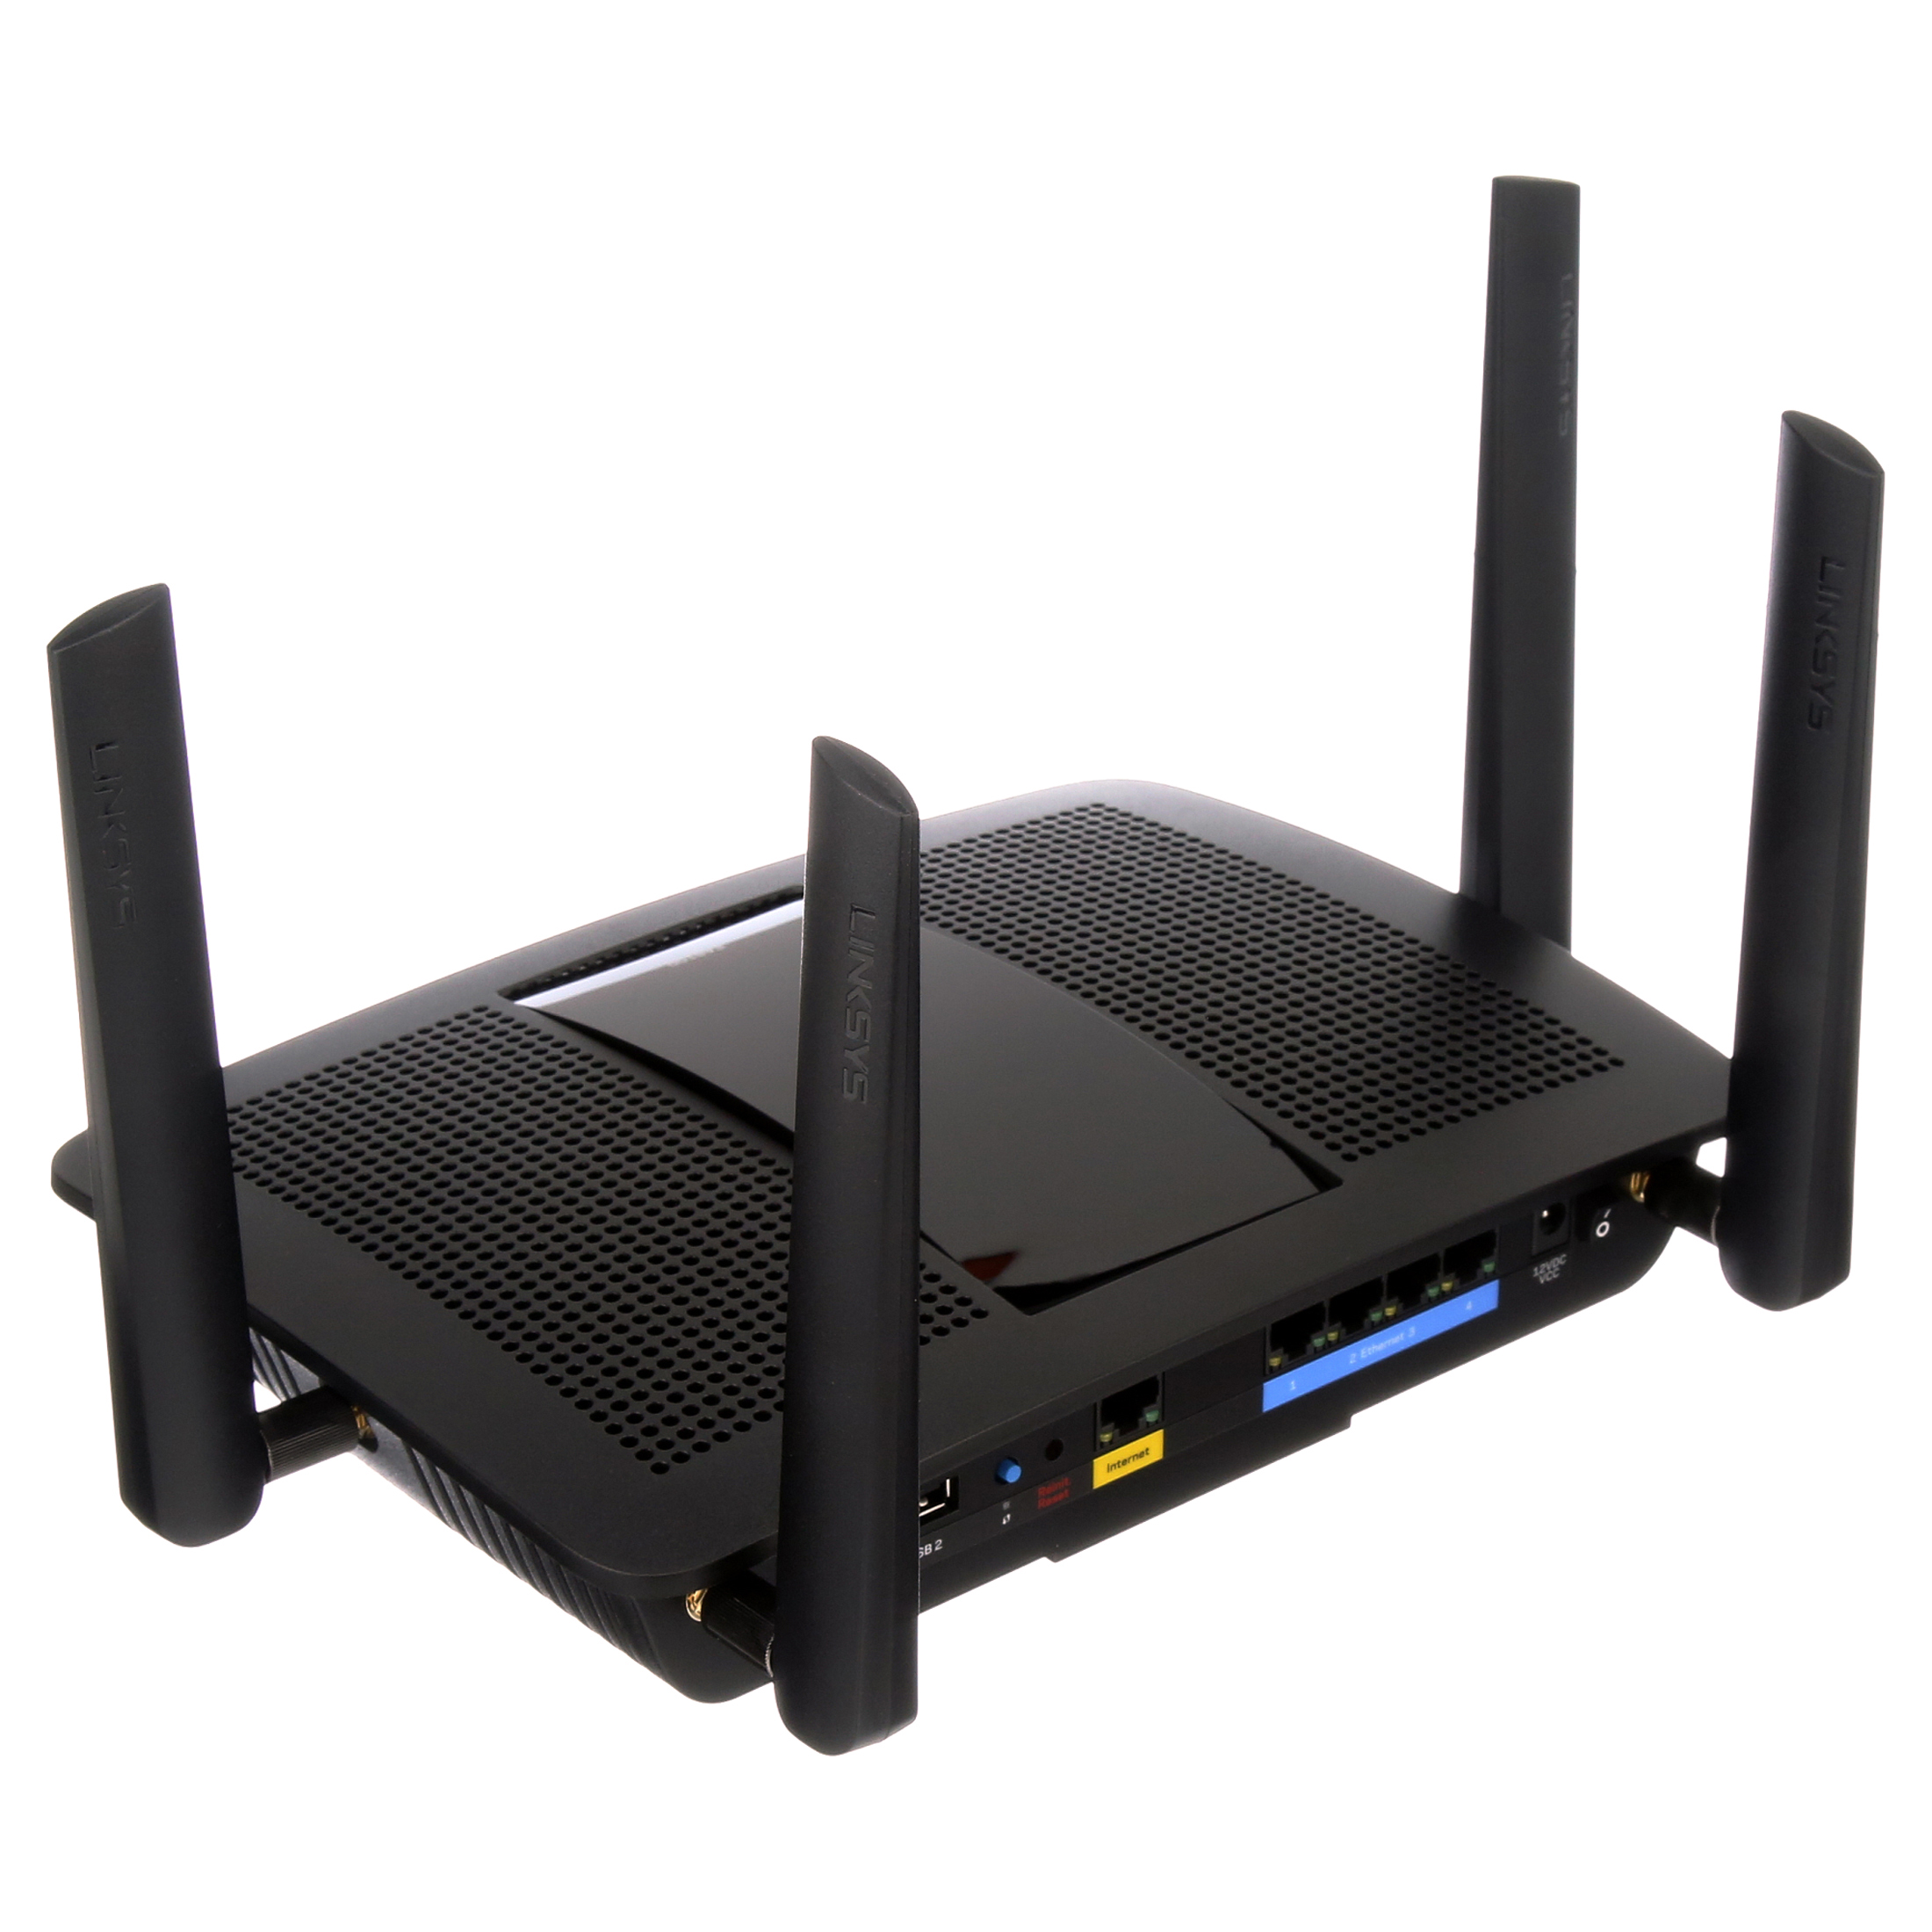 Linksys AC2600 4x4 MU-MIMO Dual-Band Gigabit Router with USB 3.0 and eSATA (EA8100) - image 9 of 9